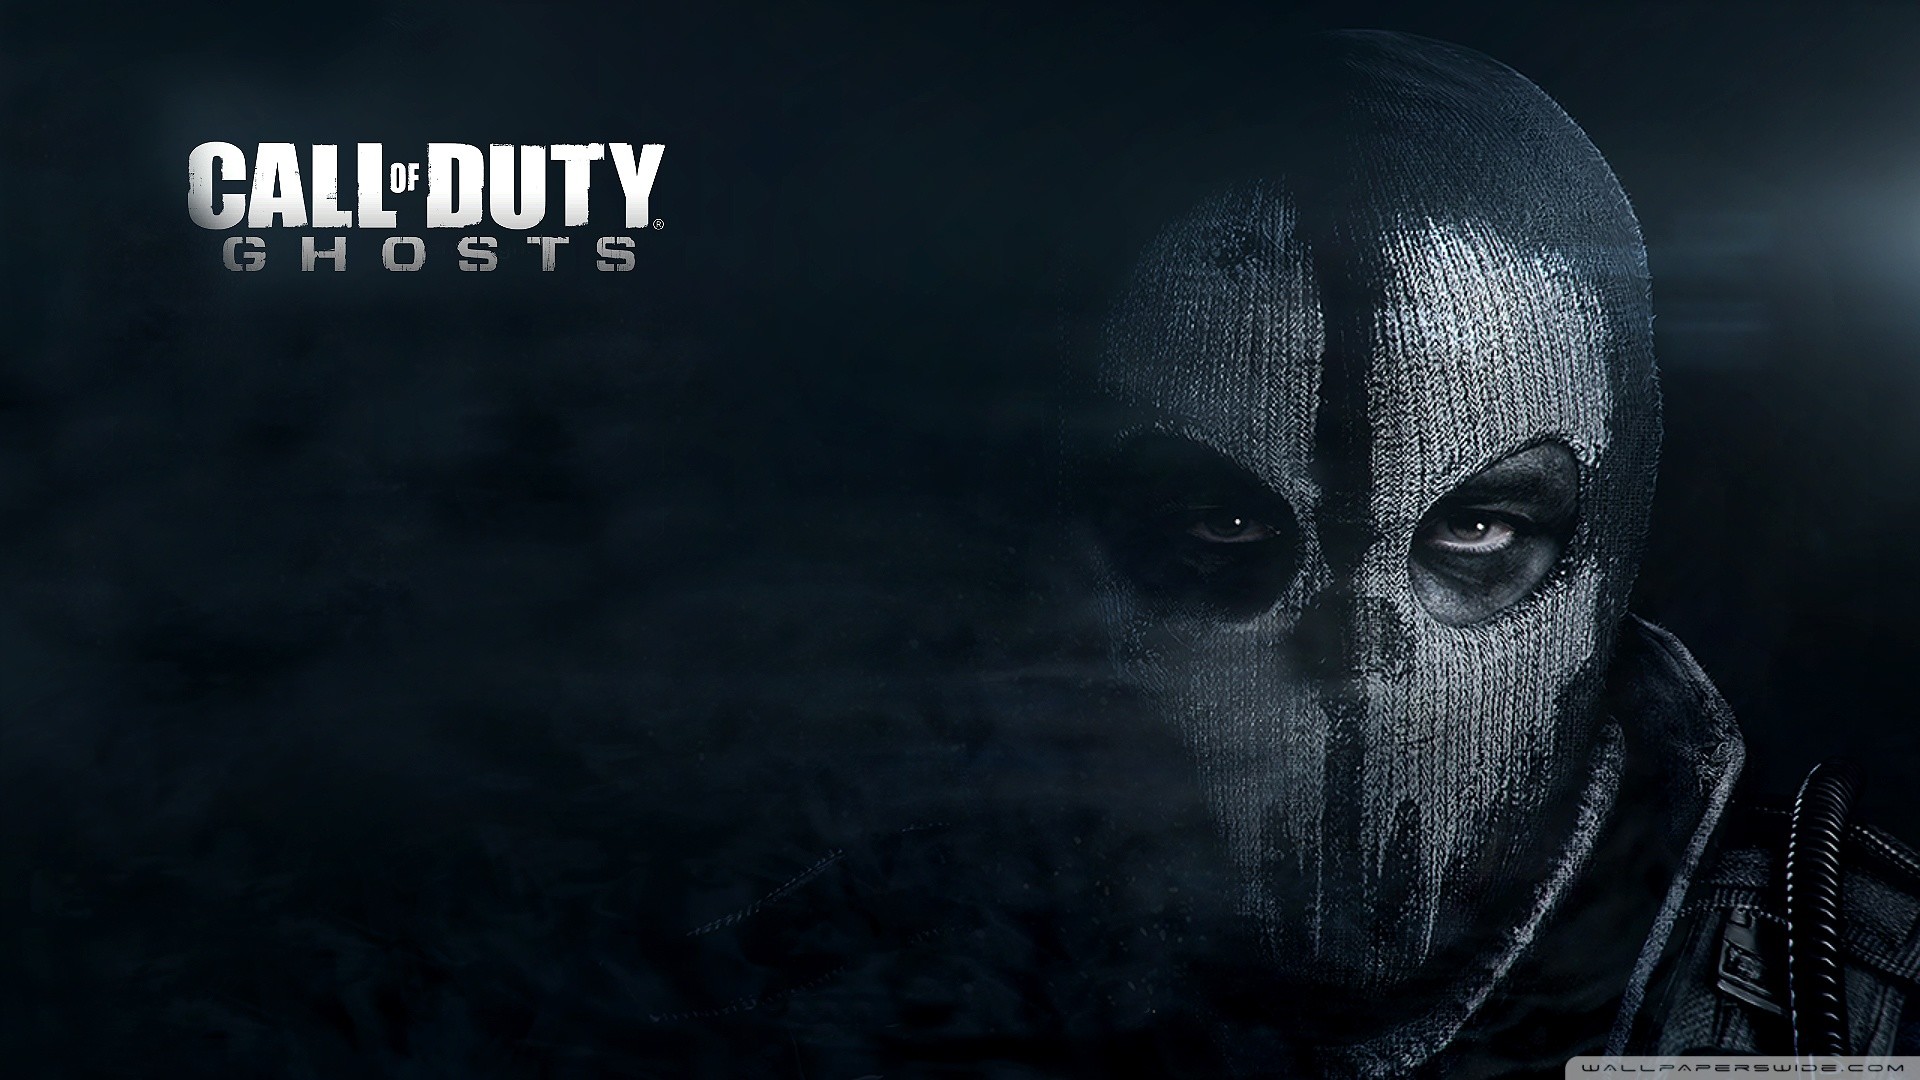 Call Of Duty Ghost Wallpaper.